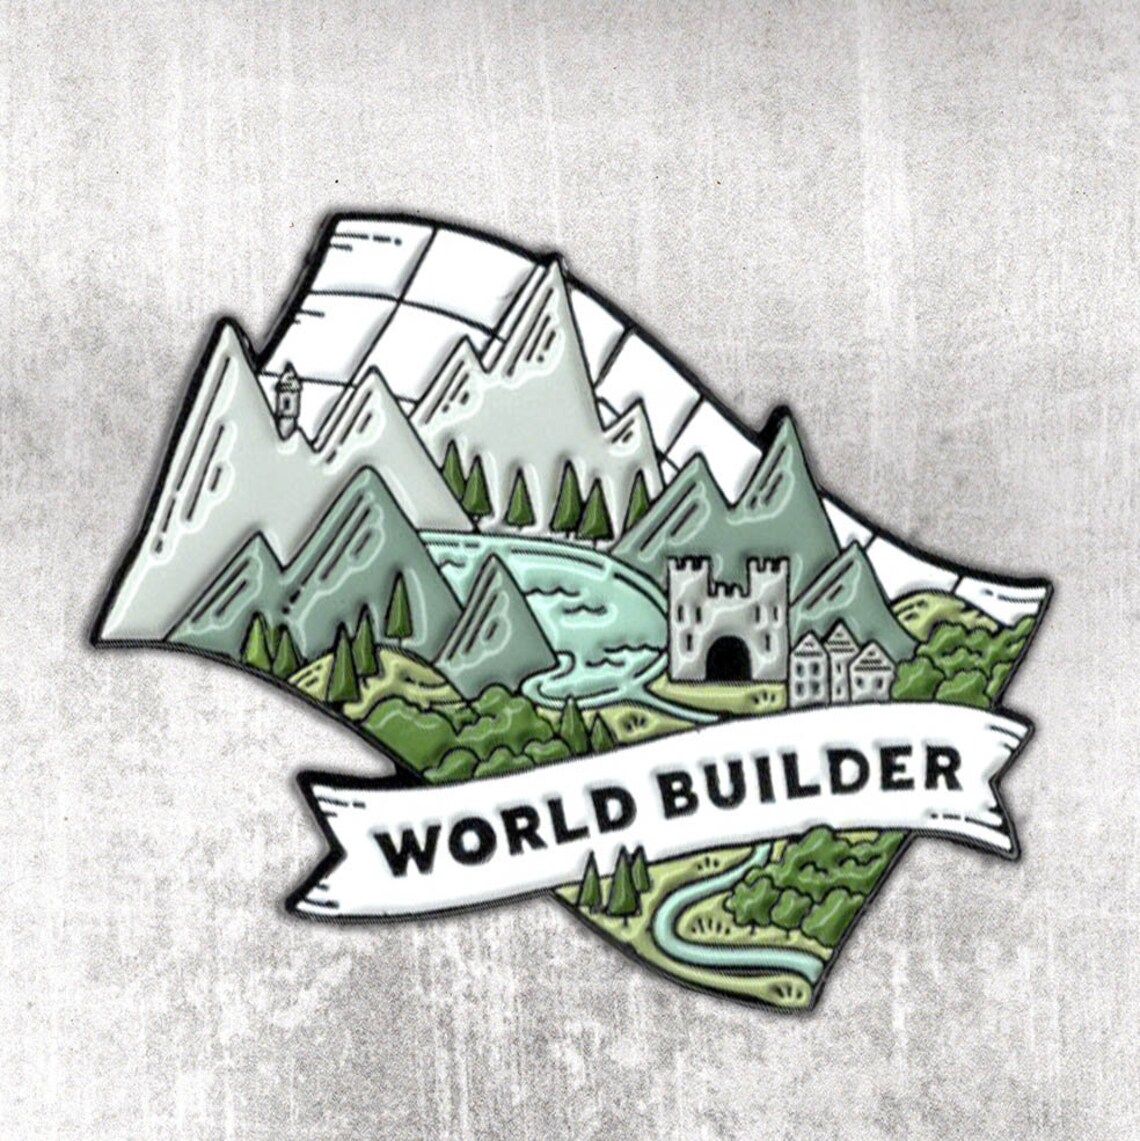 Enamel pin that says "world builder" with castle and landscape